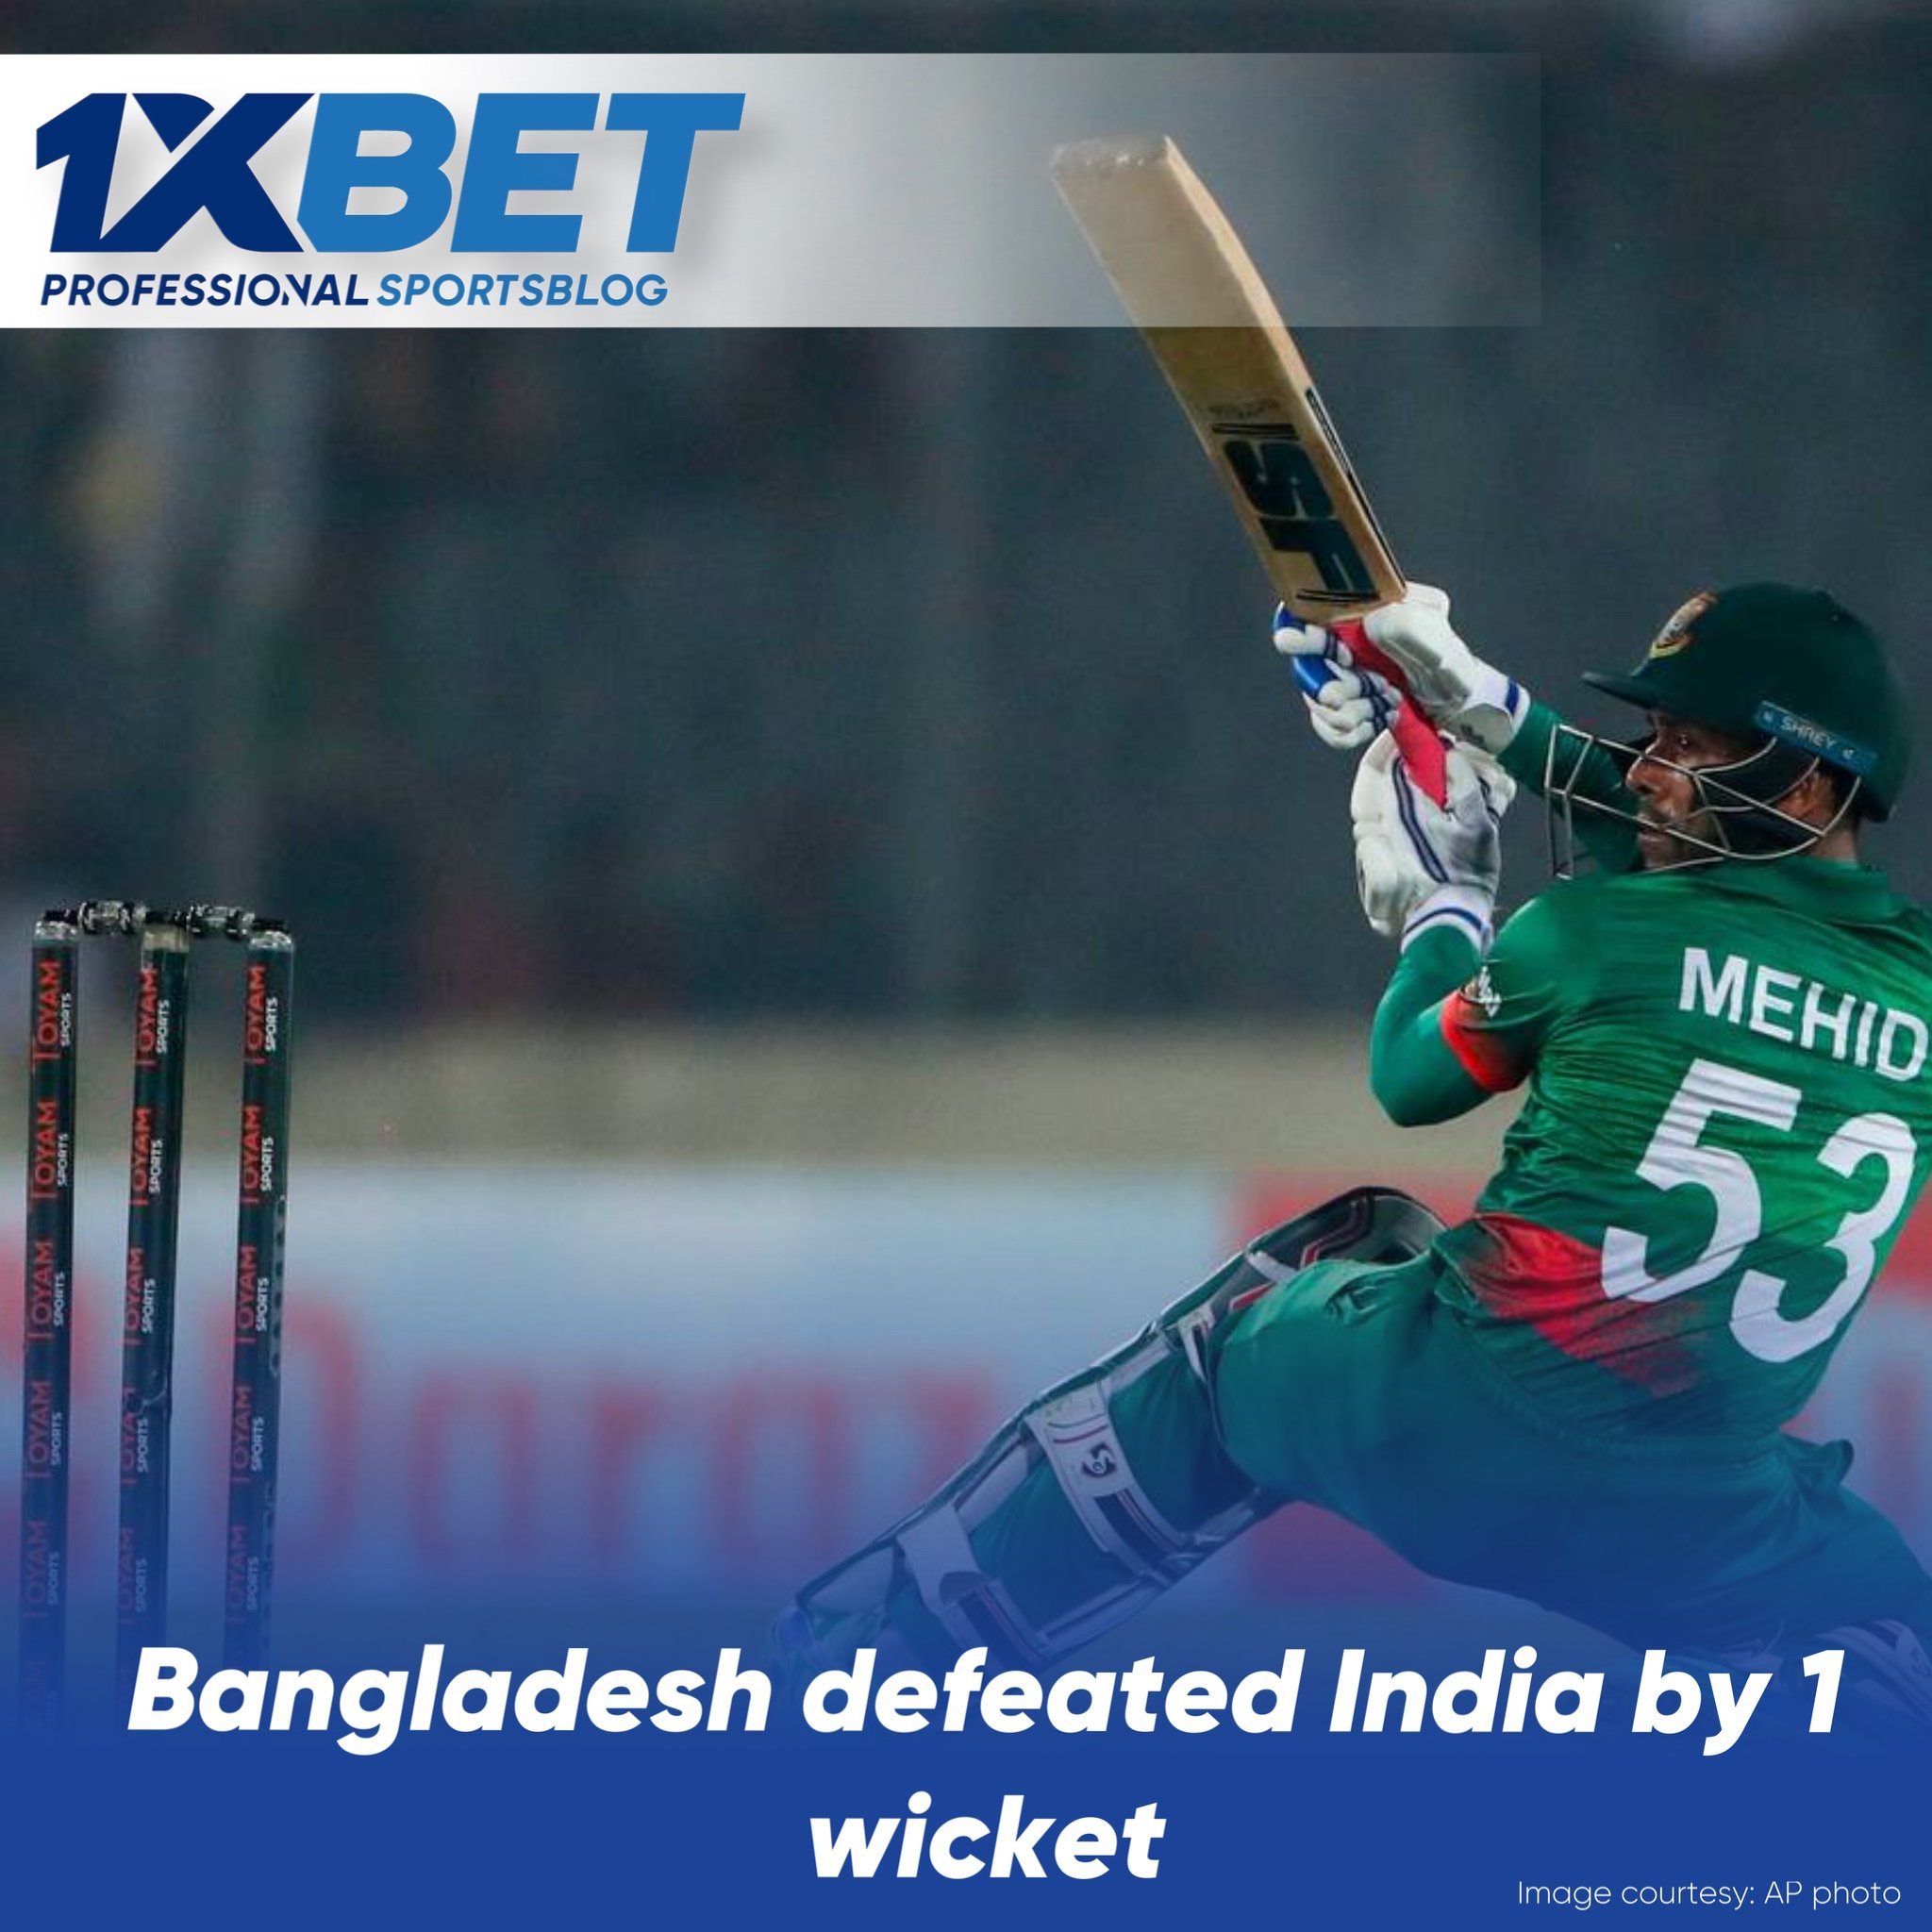 Bangladesh defeated India by 1 wicket